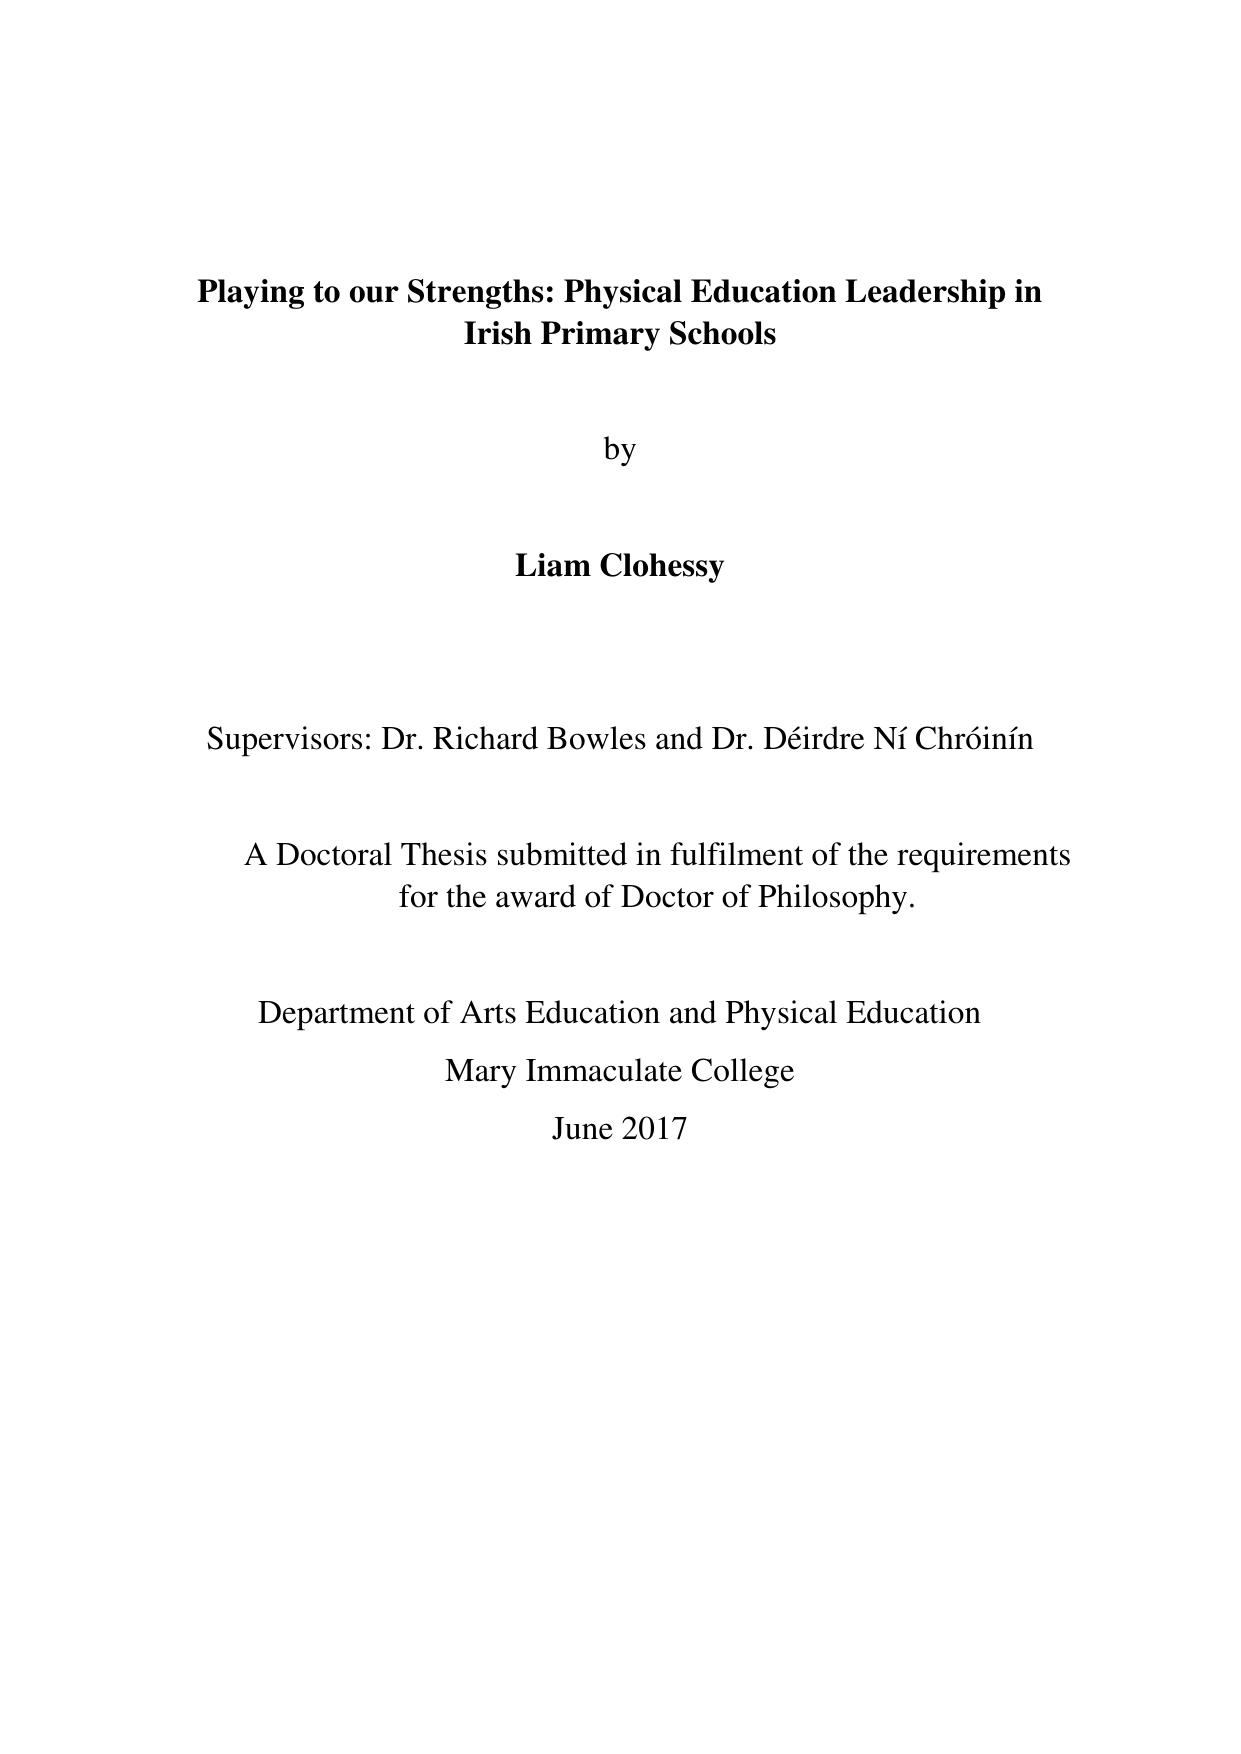 Playing to our Strengths Physical Education Leadership in Irish Primary Schools 2017.pdf